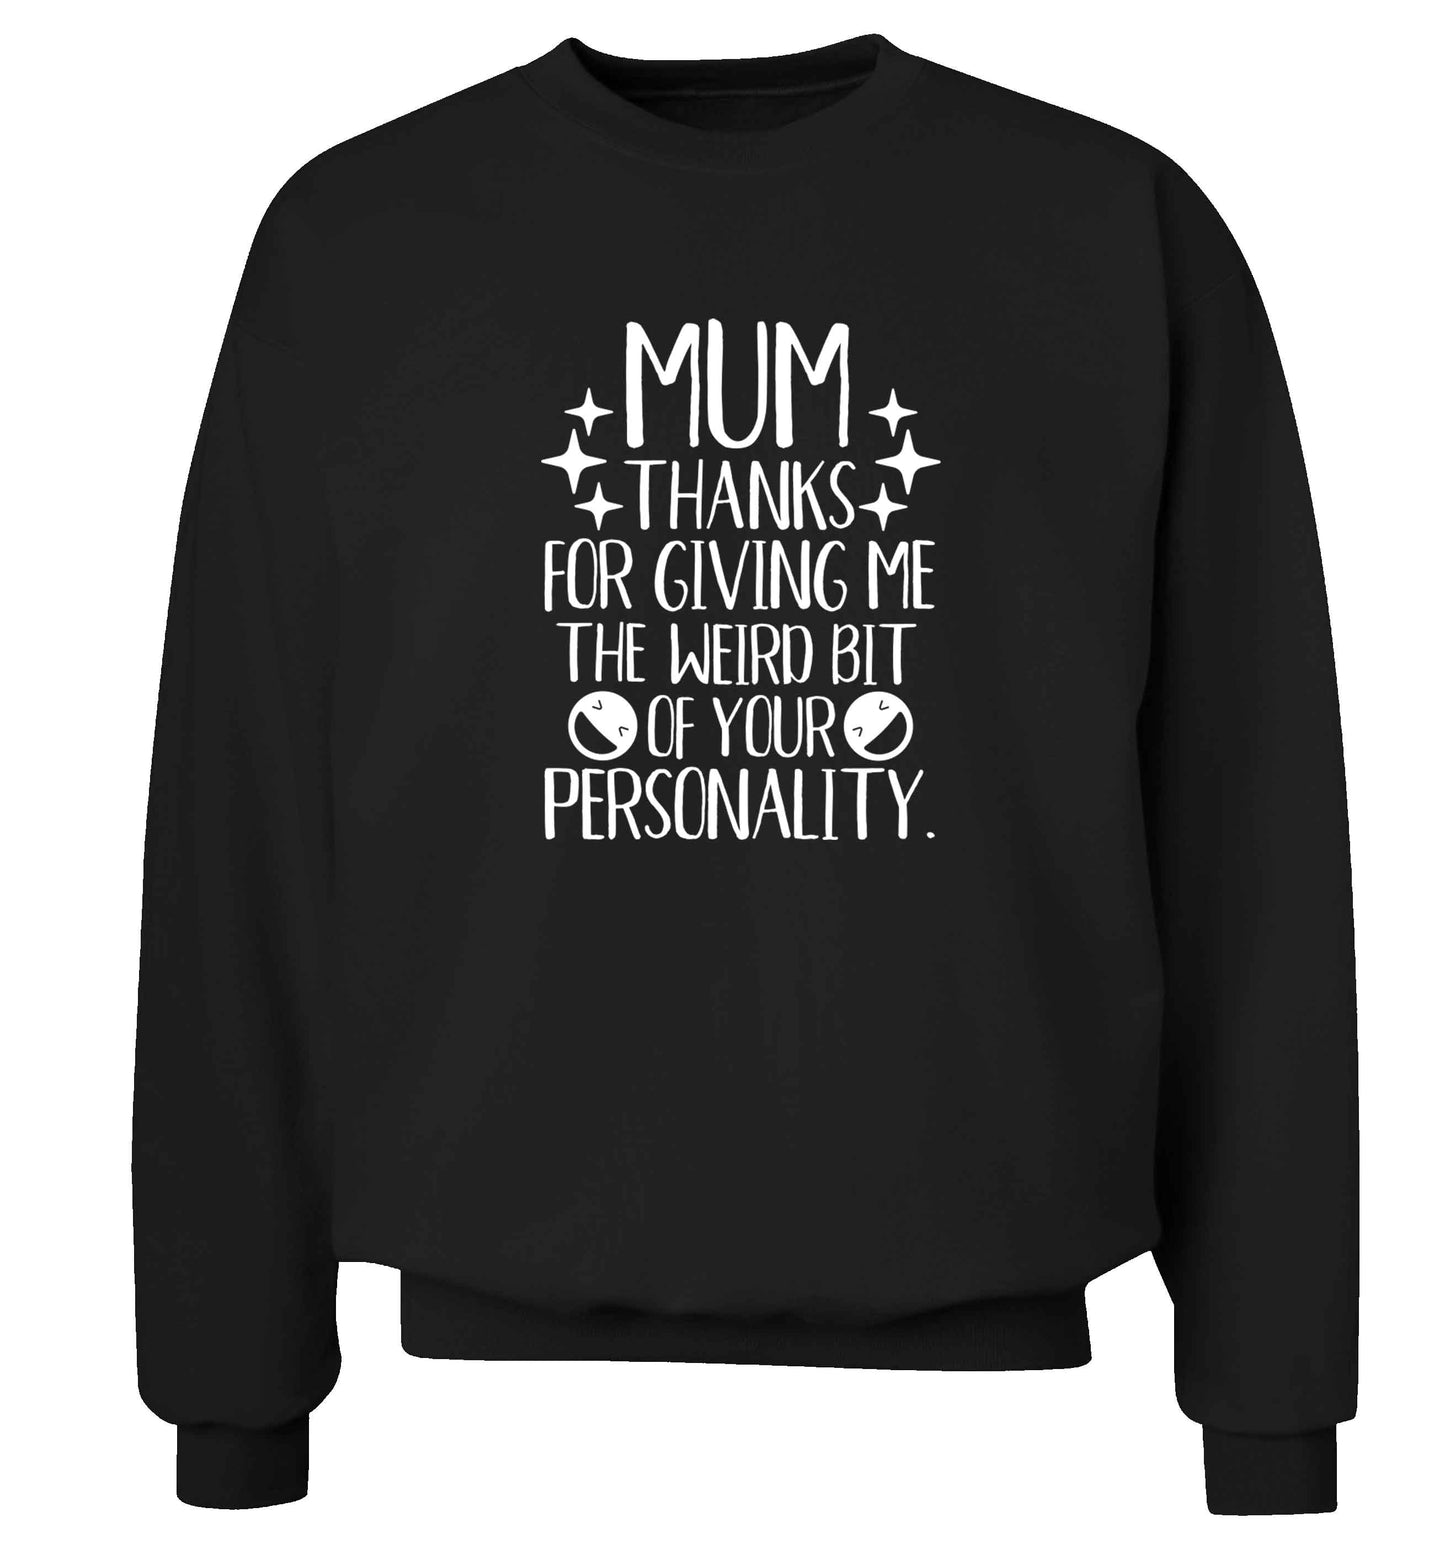 Mum, I love you more than halloumi and if you know me at all you know how deep that is adult's unisex black sweater 2XL